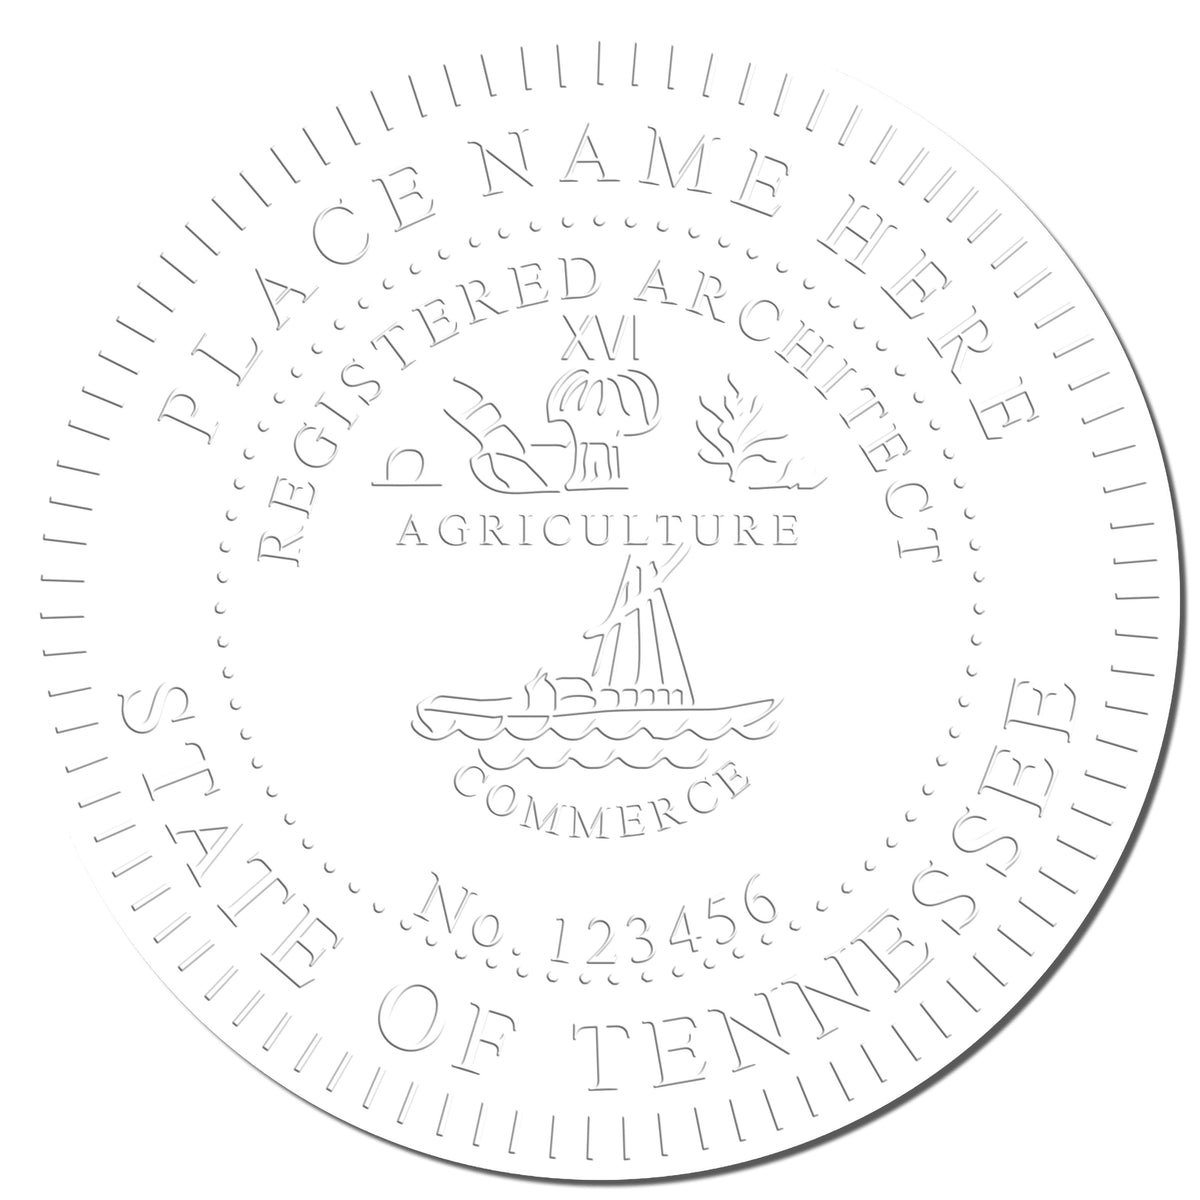 A photograph of the Tennessee Desk Architect Embossing Seal stamp impression reveals a vivid, professional image of the on paper.